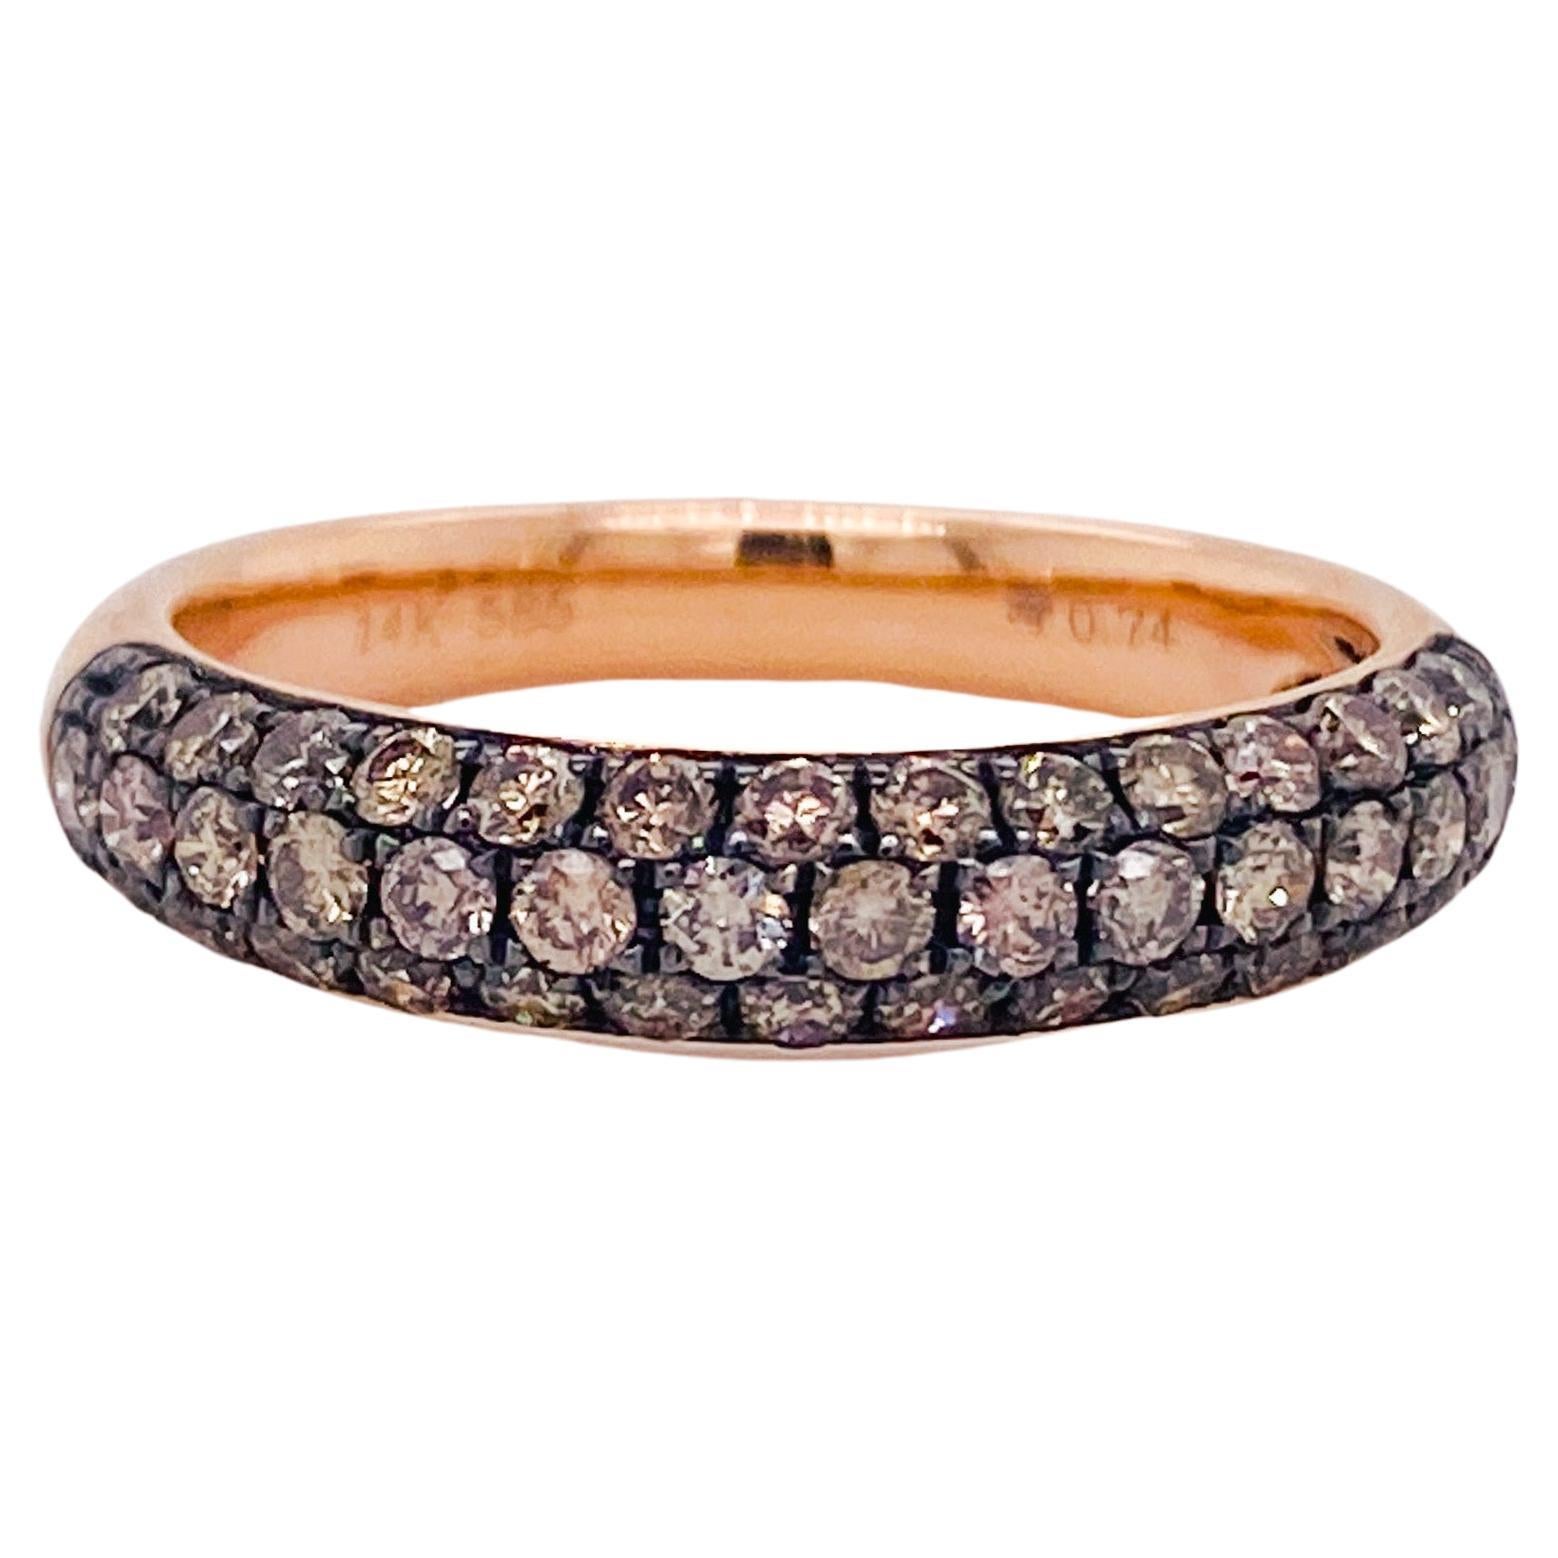 Bombe Champagne Diamond Pave Ring, 3/4 Carats in 14k Rose Gold, Stackable Dome